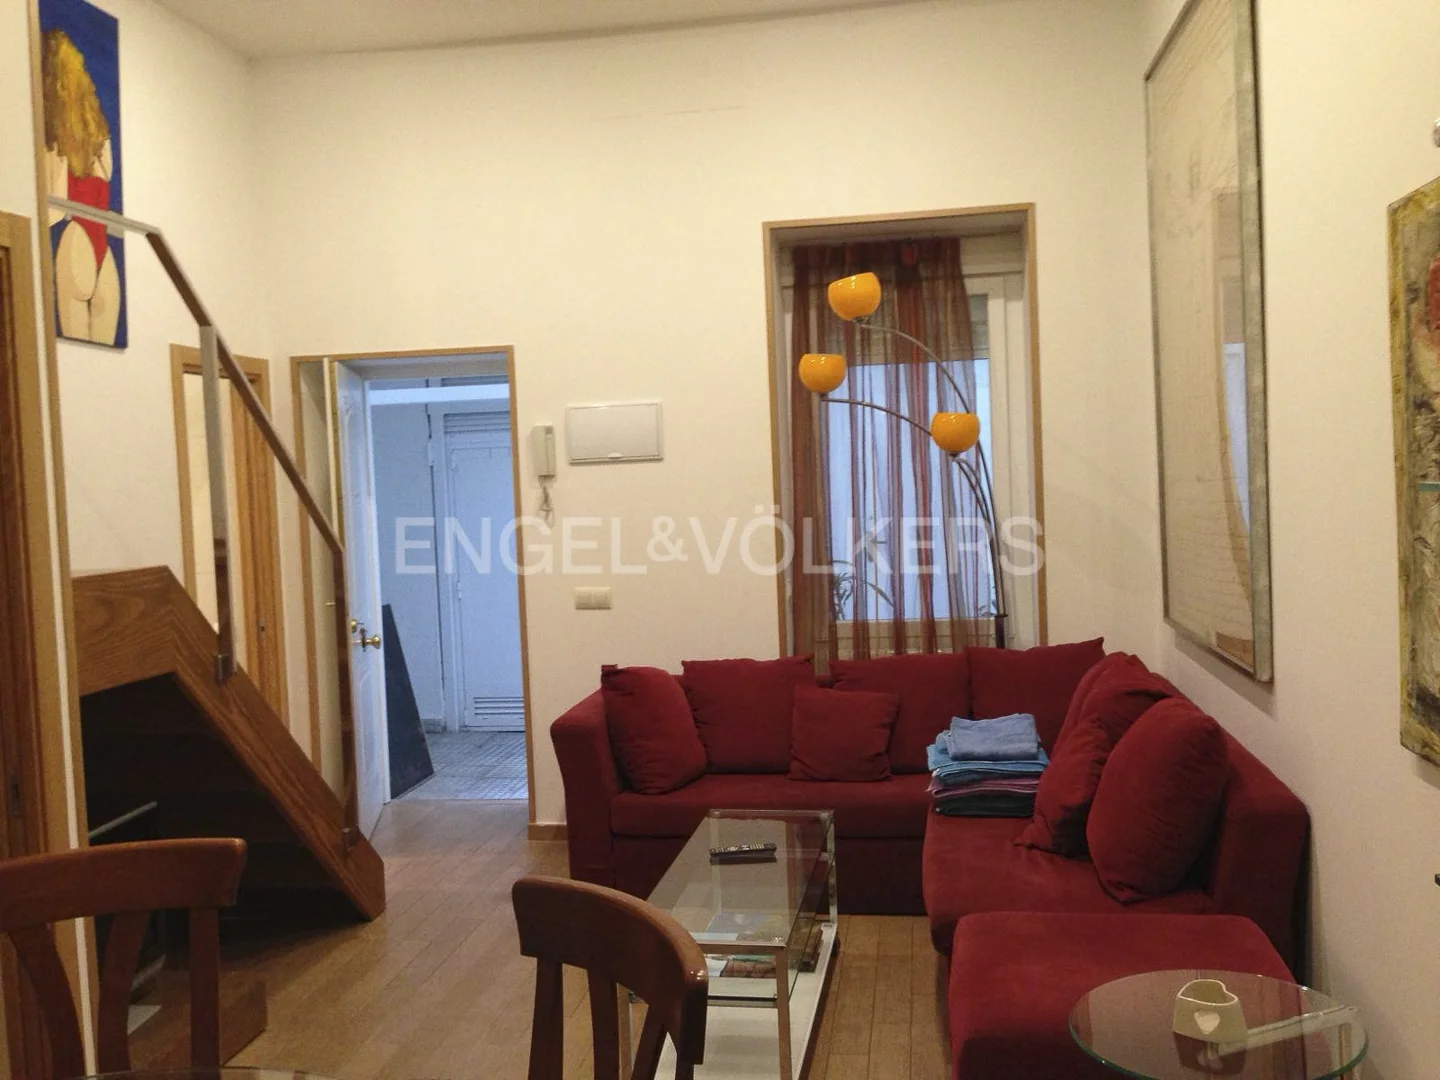 Excellent investment opportunity in the heart of Chueca